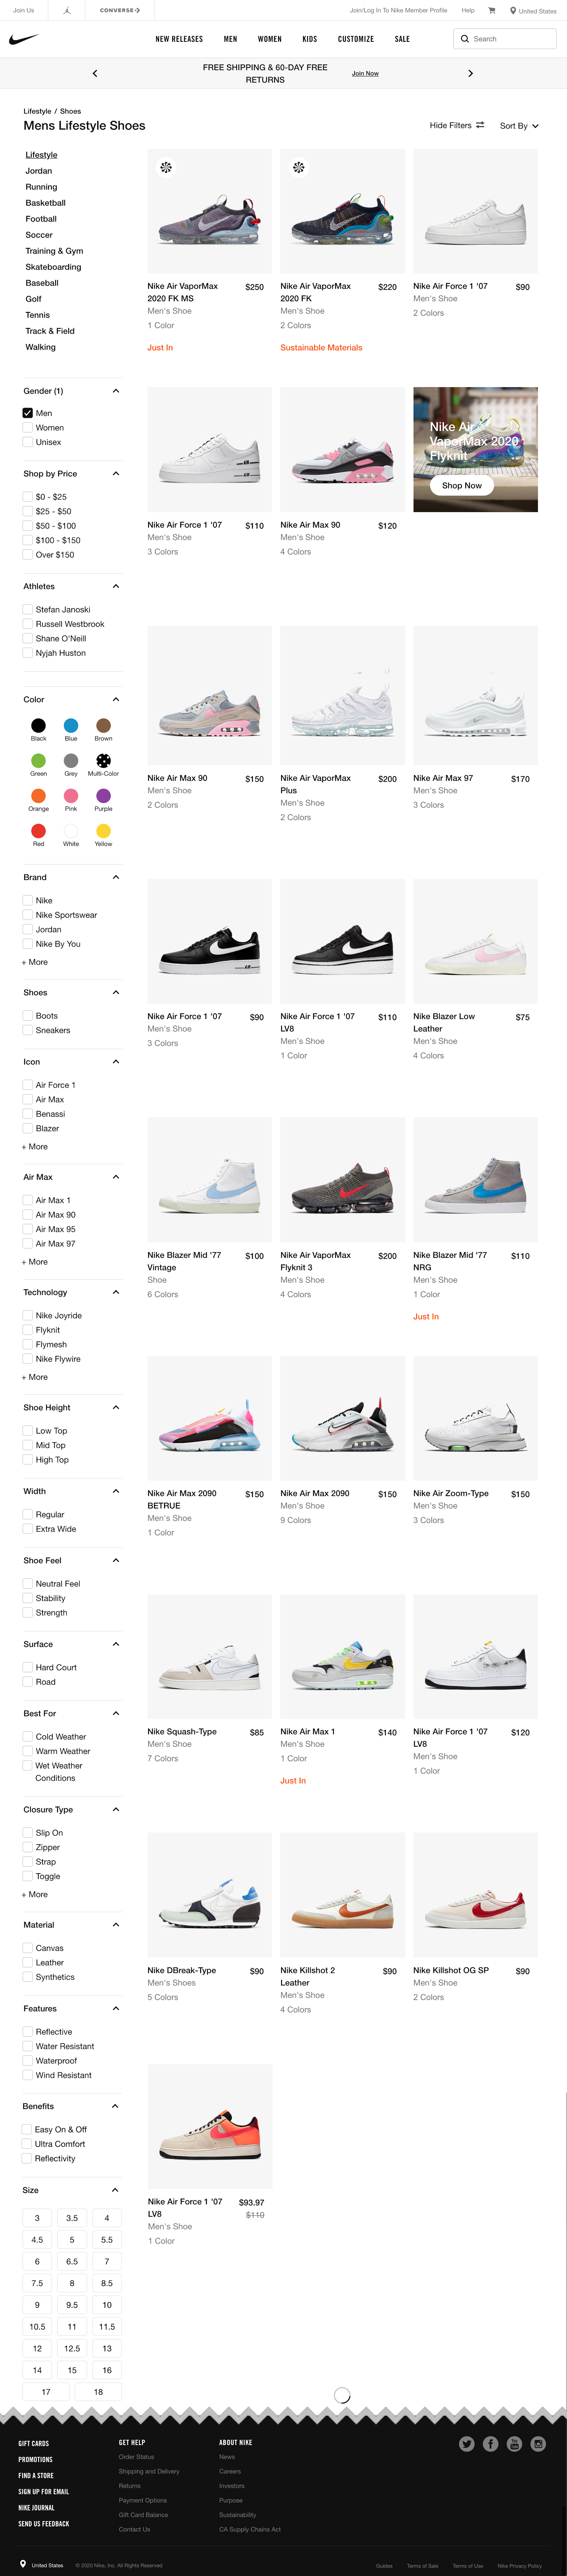 manager Arne Gedwongen Nike's Product List – 364 of 735 Product List Examples – Baymard Institute